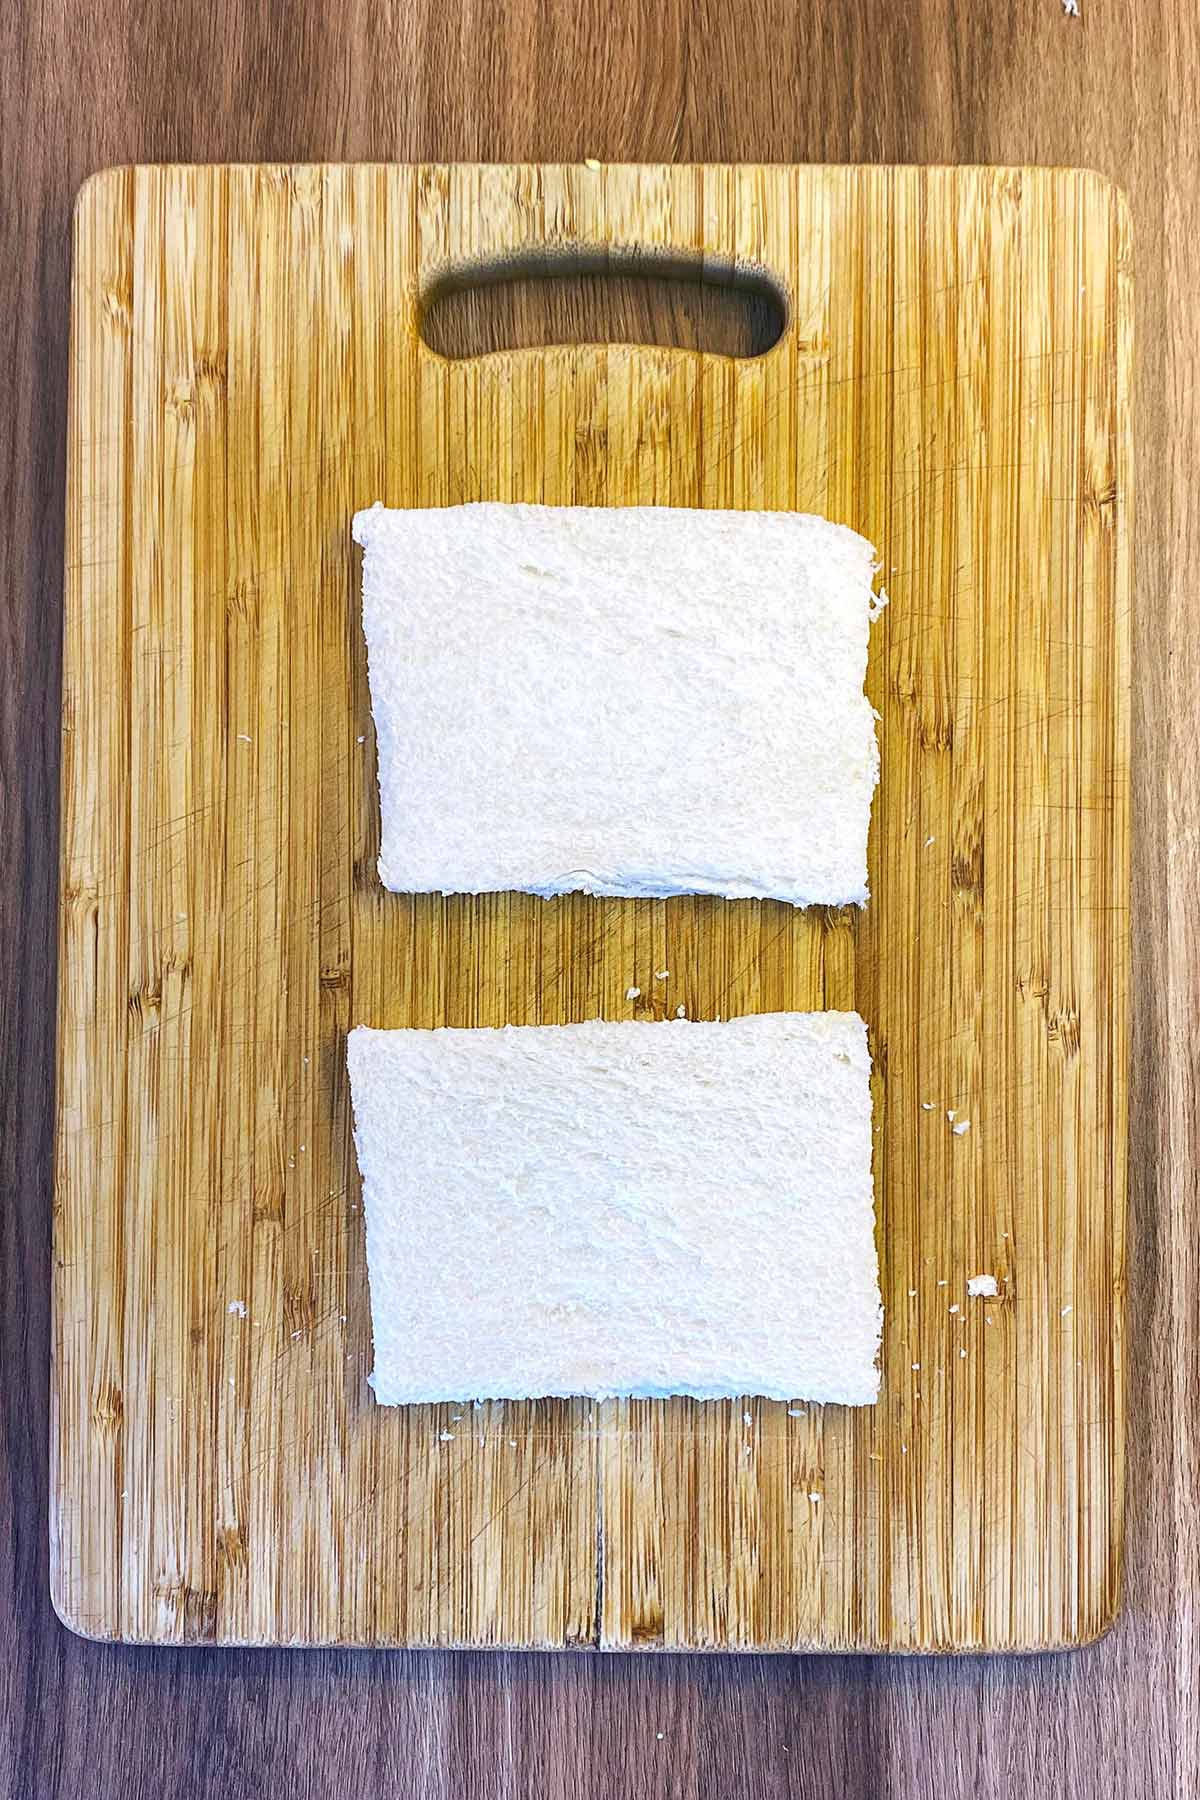 Two slices of white bread with their crusts removed.